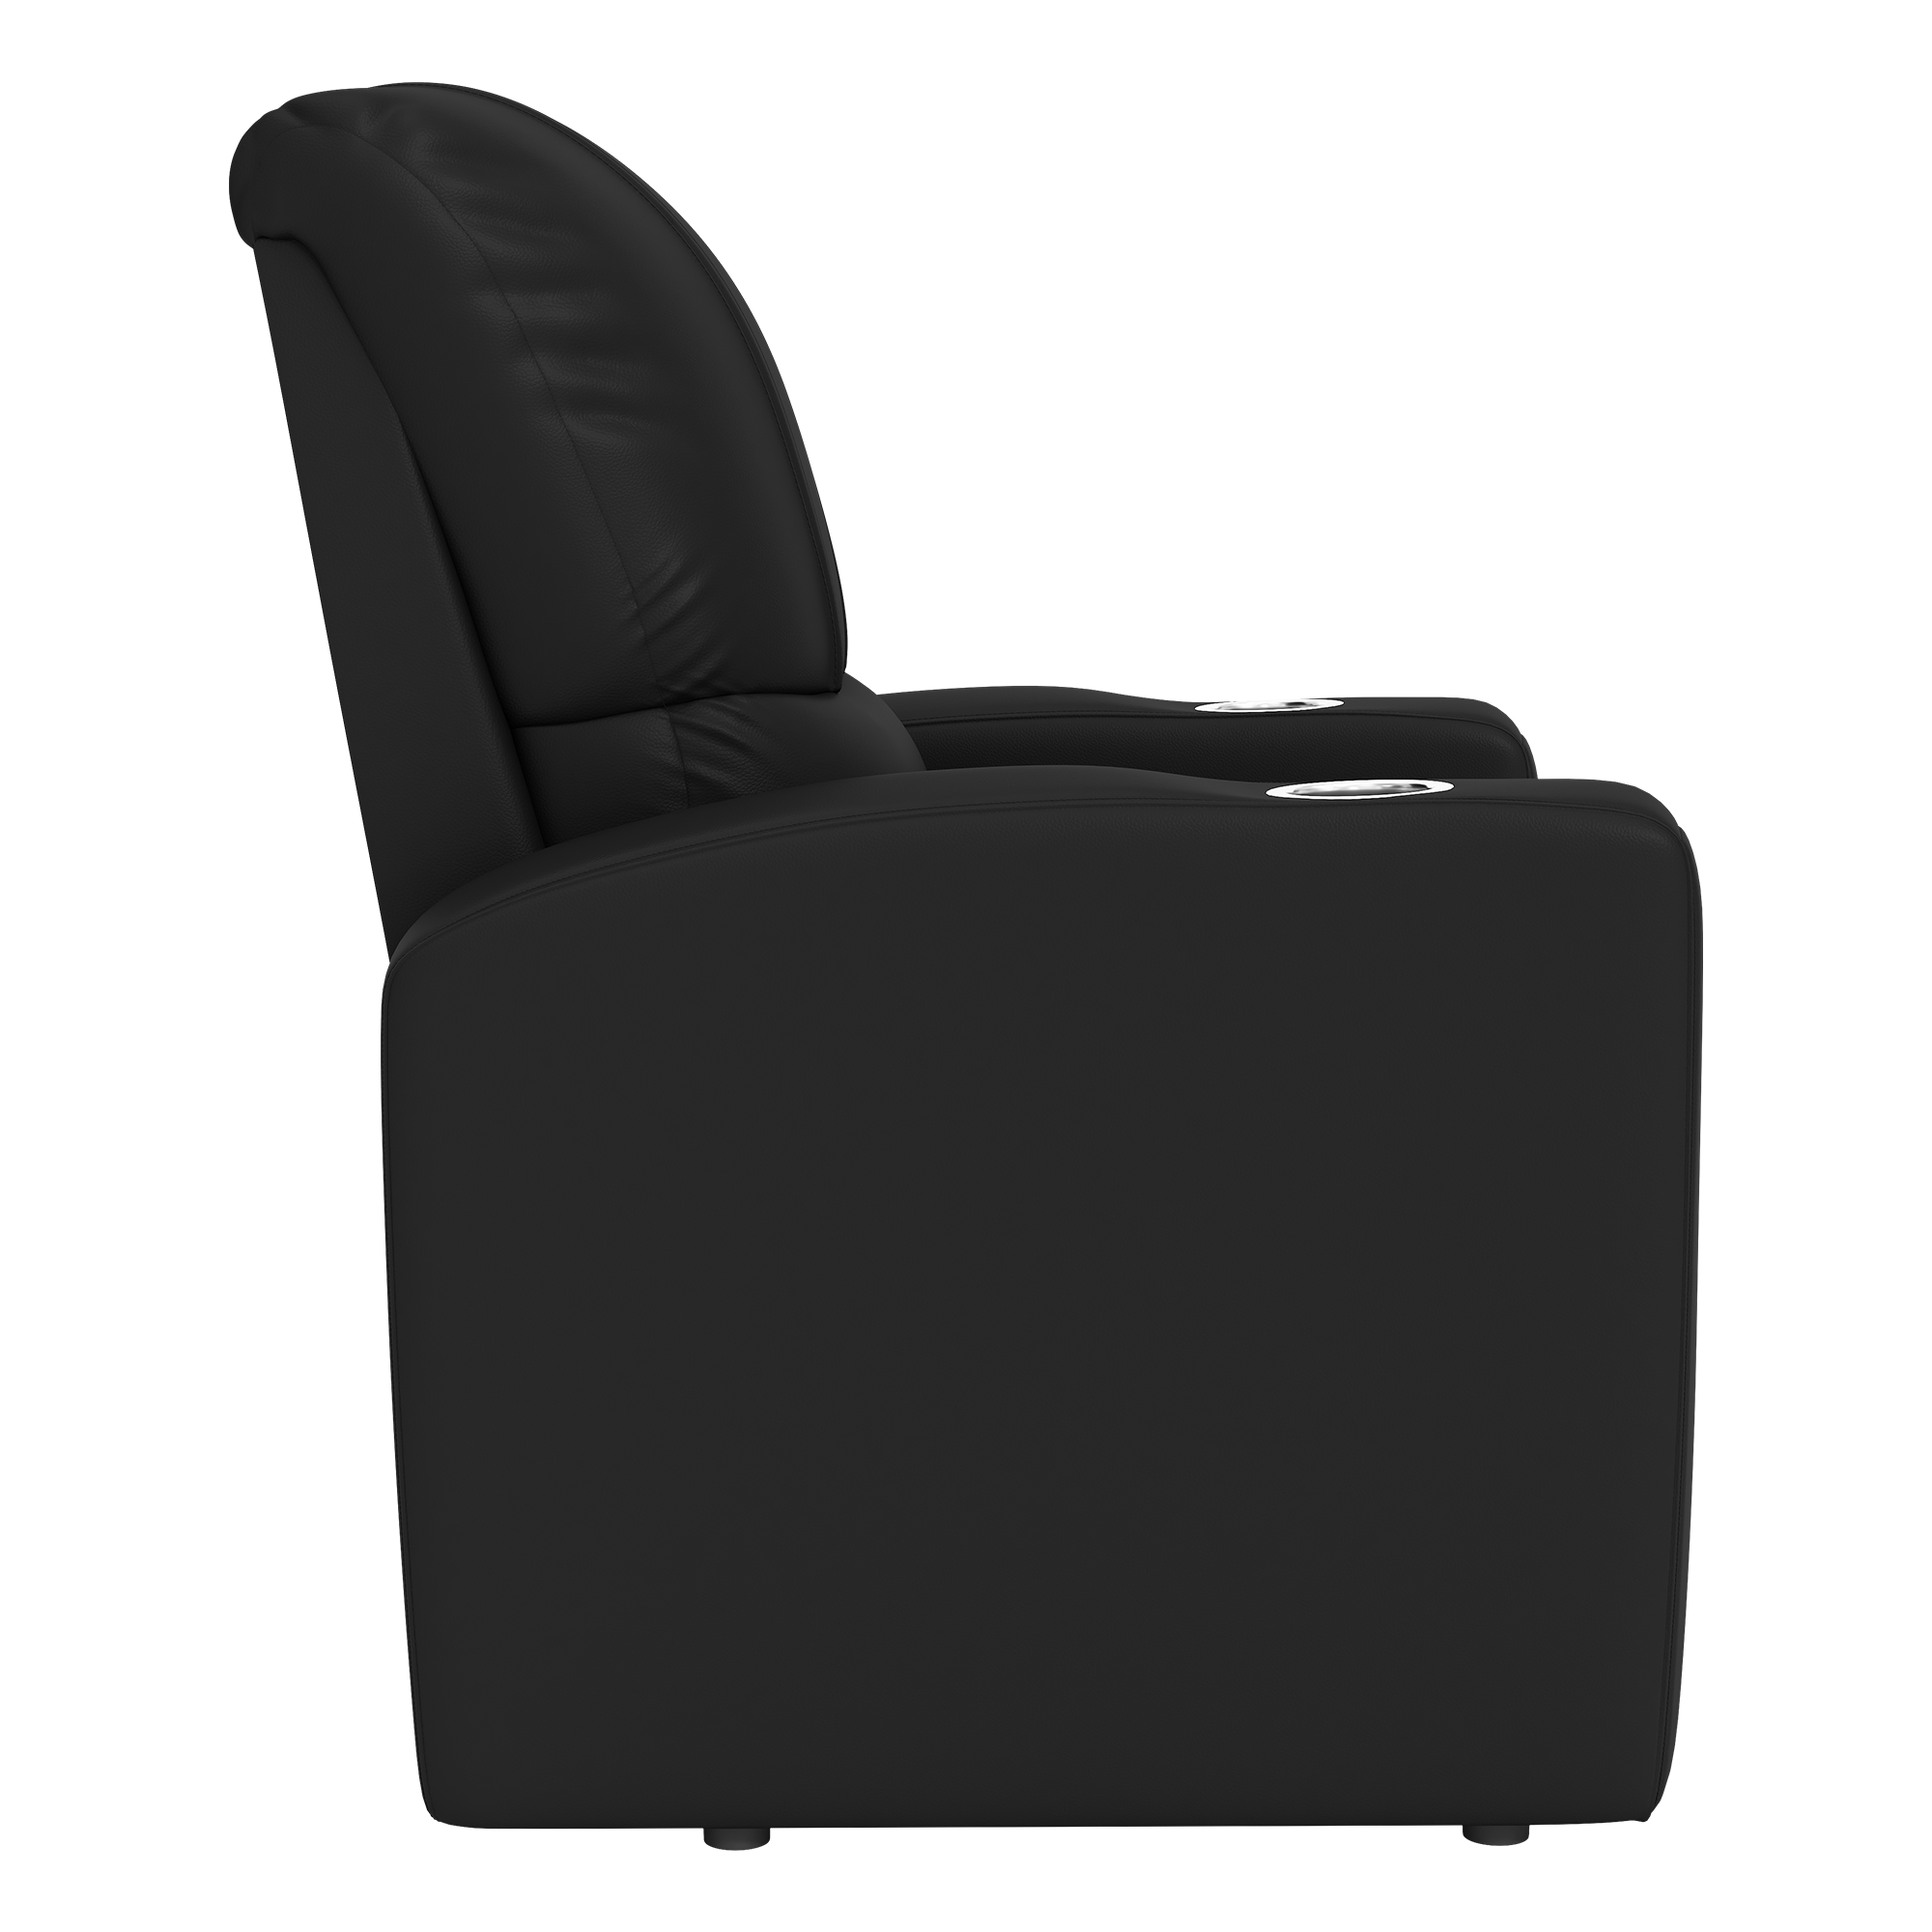 Stealth Recliner with  Dallas Cowboys Secondary Logo